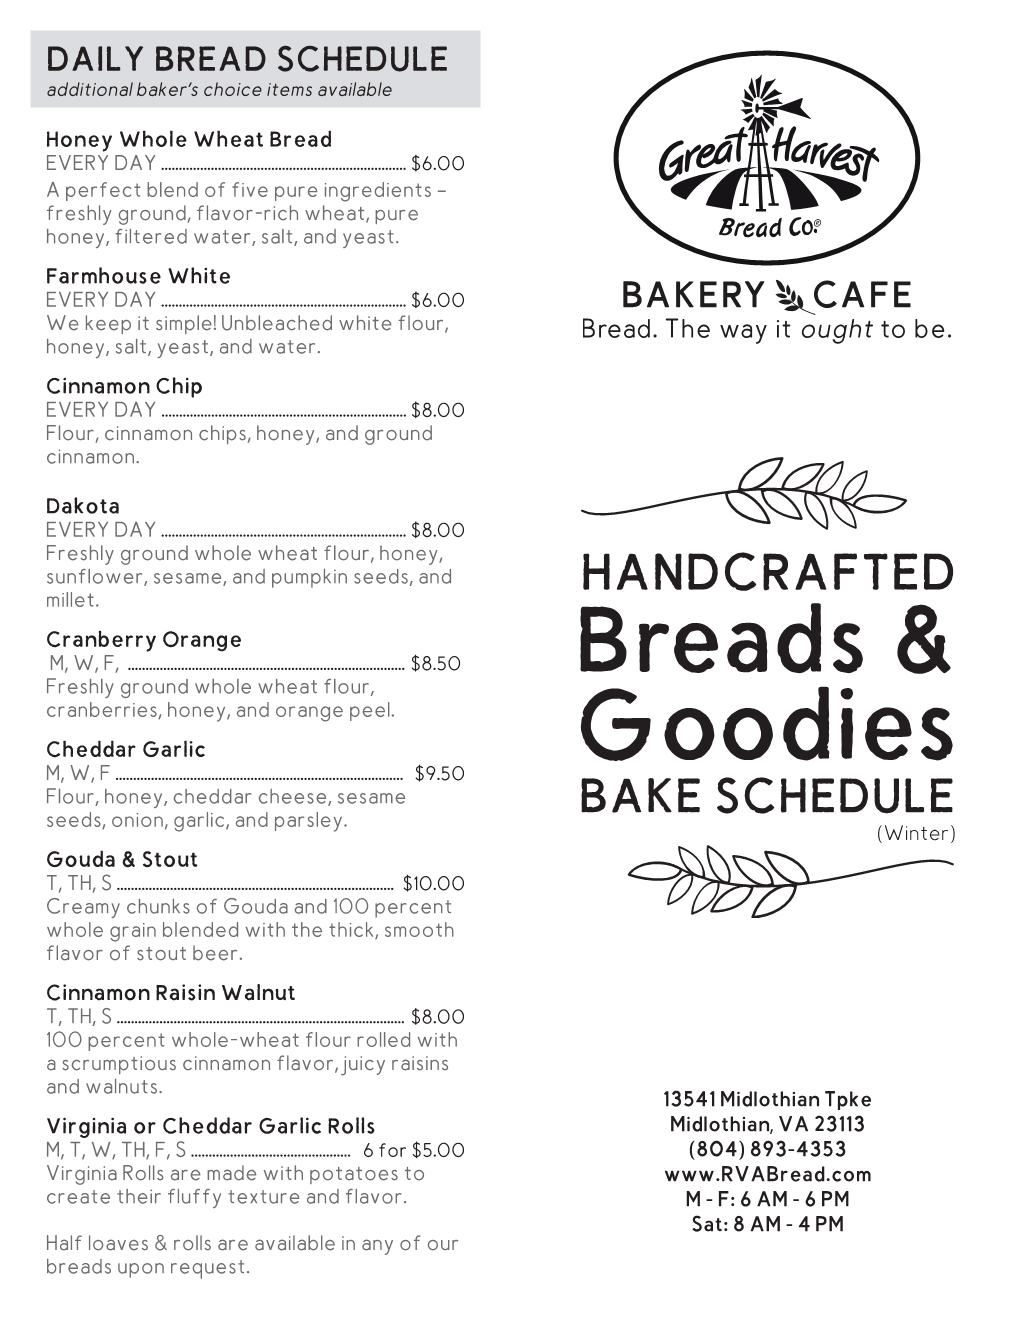 DAILY BREAD SCHEDULE Additional Baker’S Choice Items Available